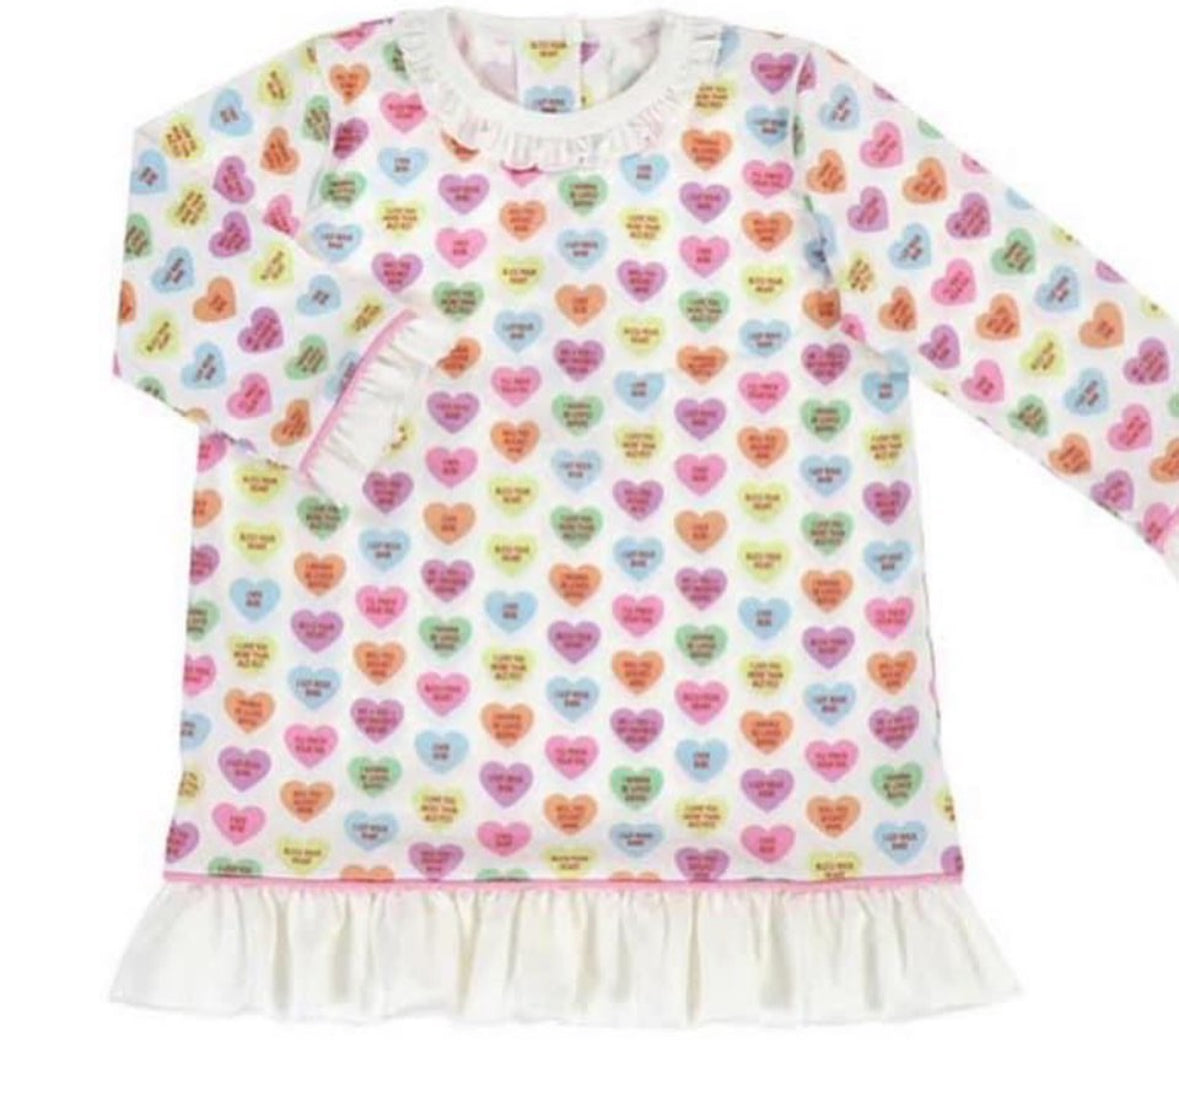 Cajun Candy Hearts gown (no pink hearts)